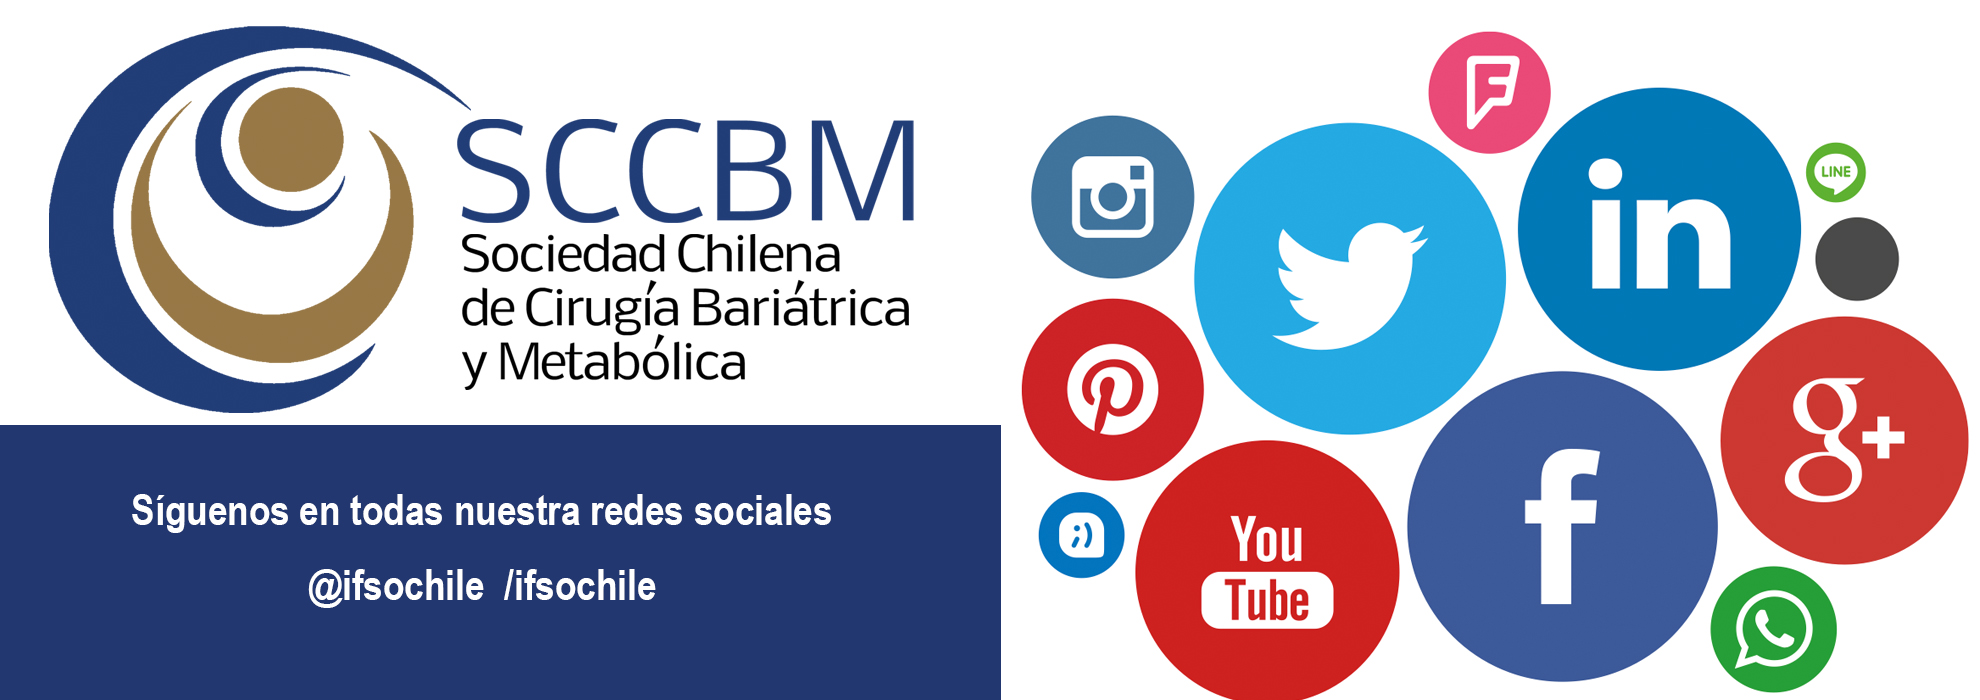 RedesSociales-SCCBMhome